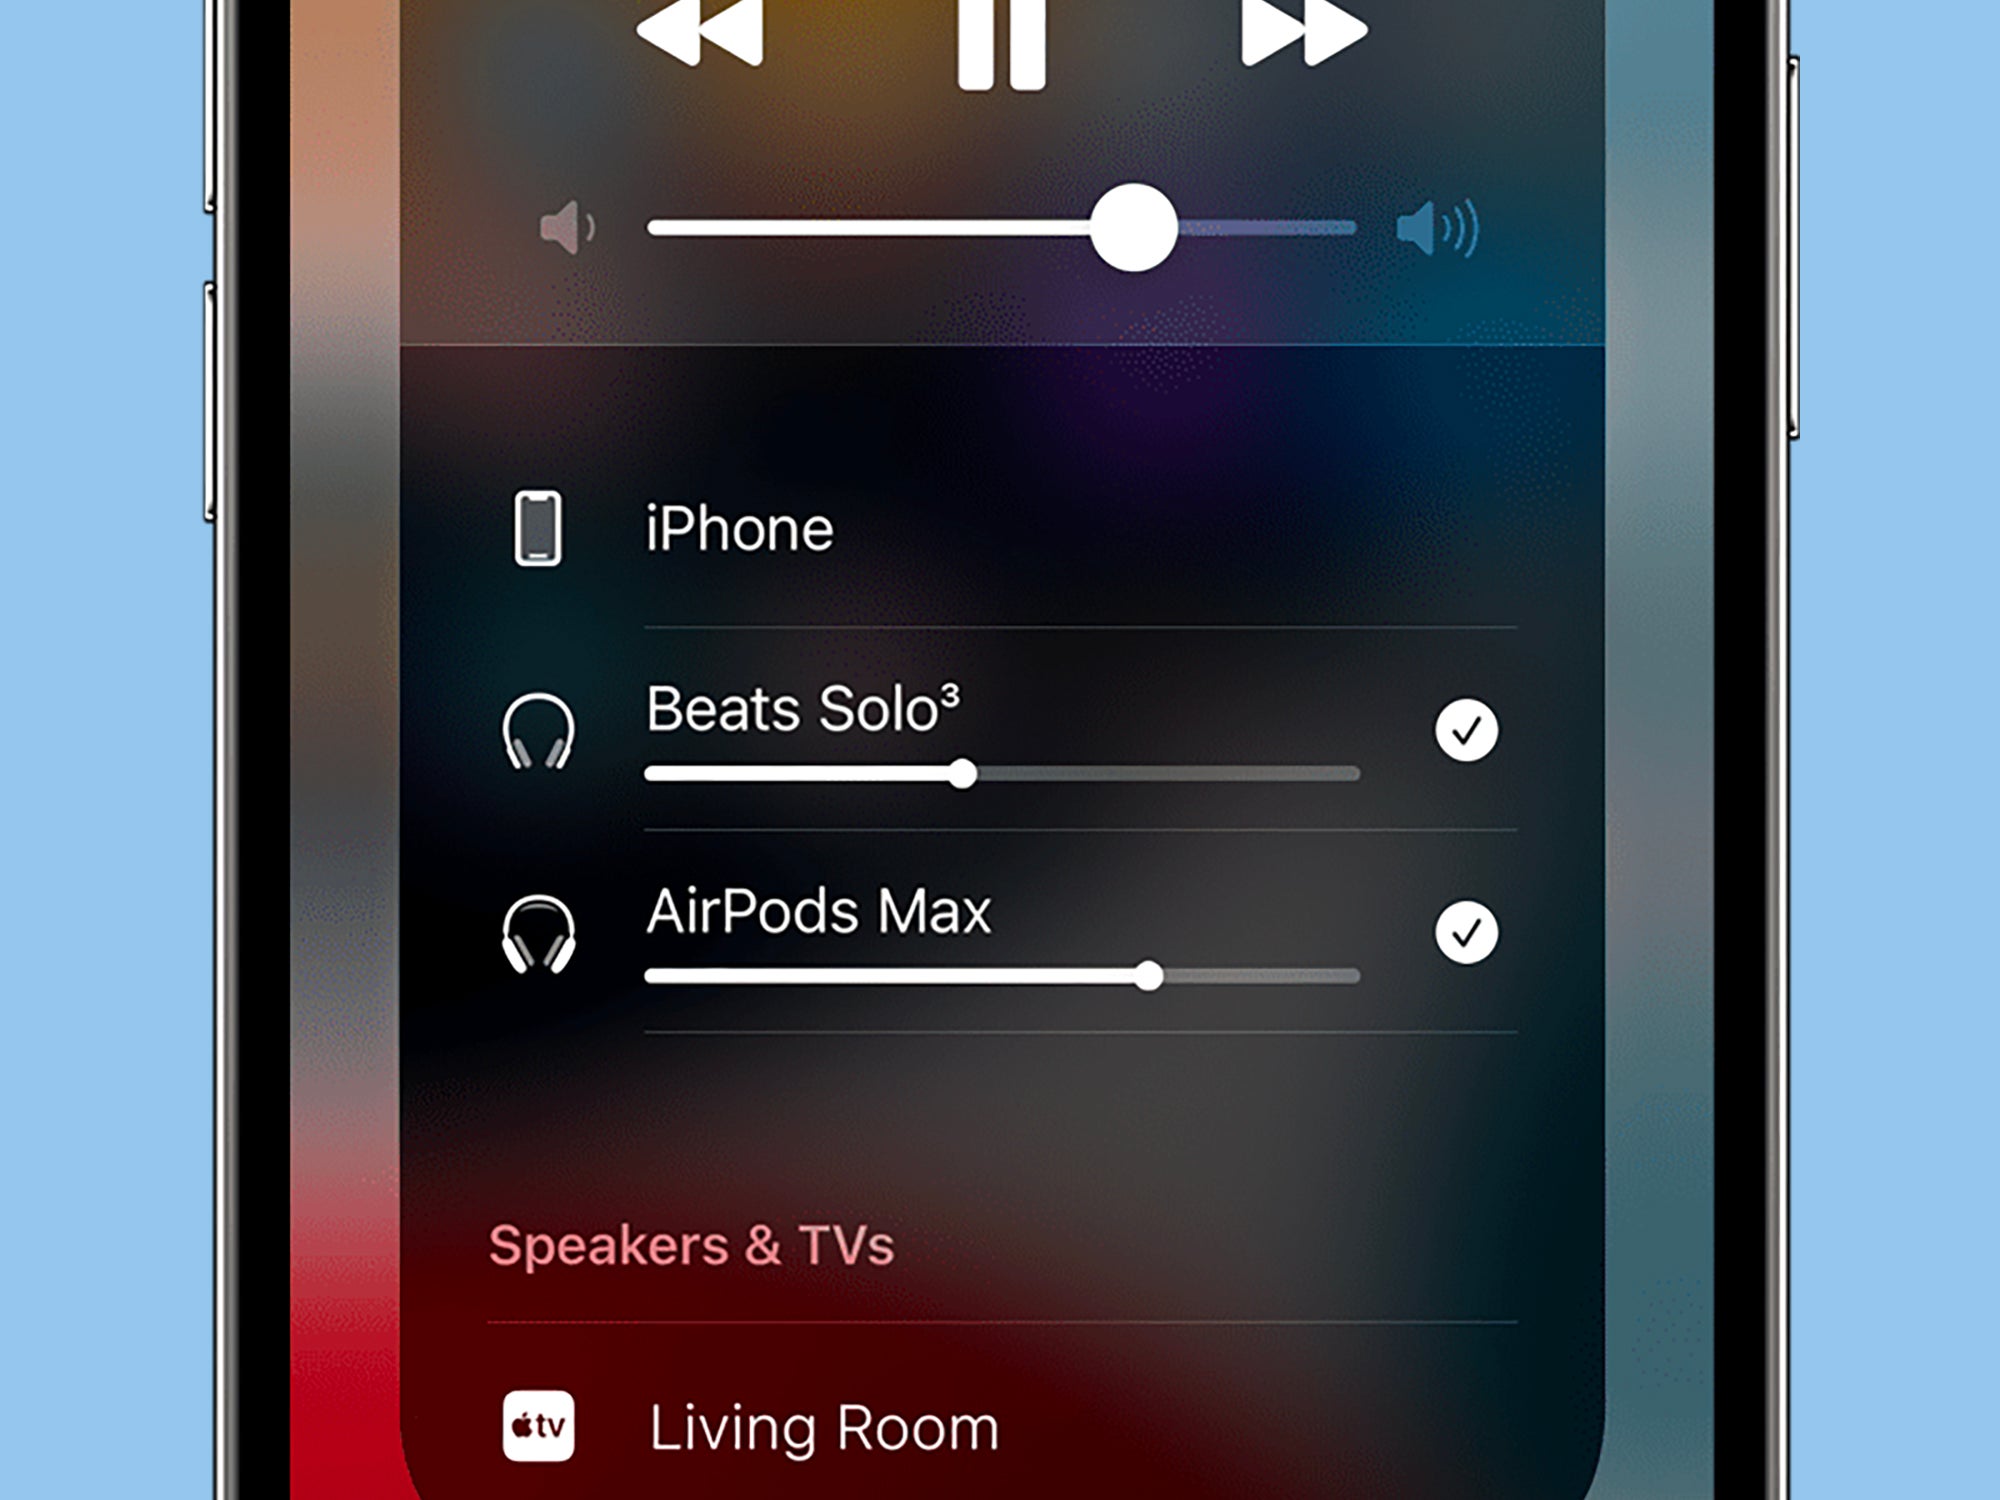 The iOS Control Center on an iPhone showing the Share Audio feature in action, with two sets of headphones (Beats Solo 3 and AirPods Max) connected to the same phone.